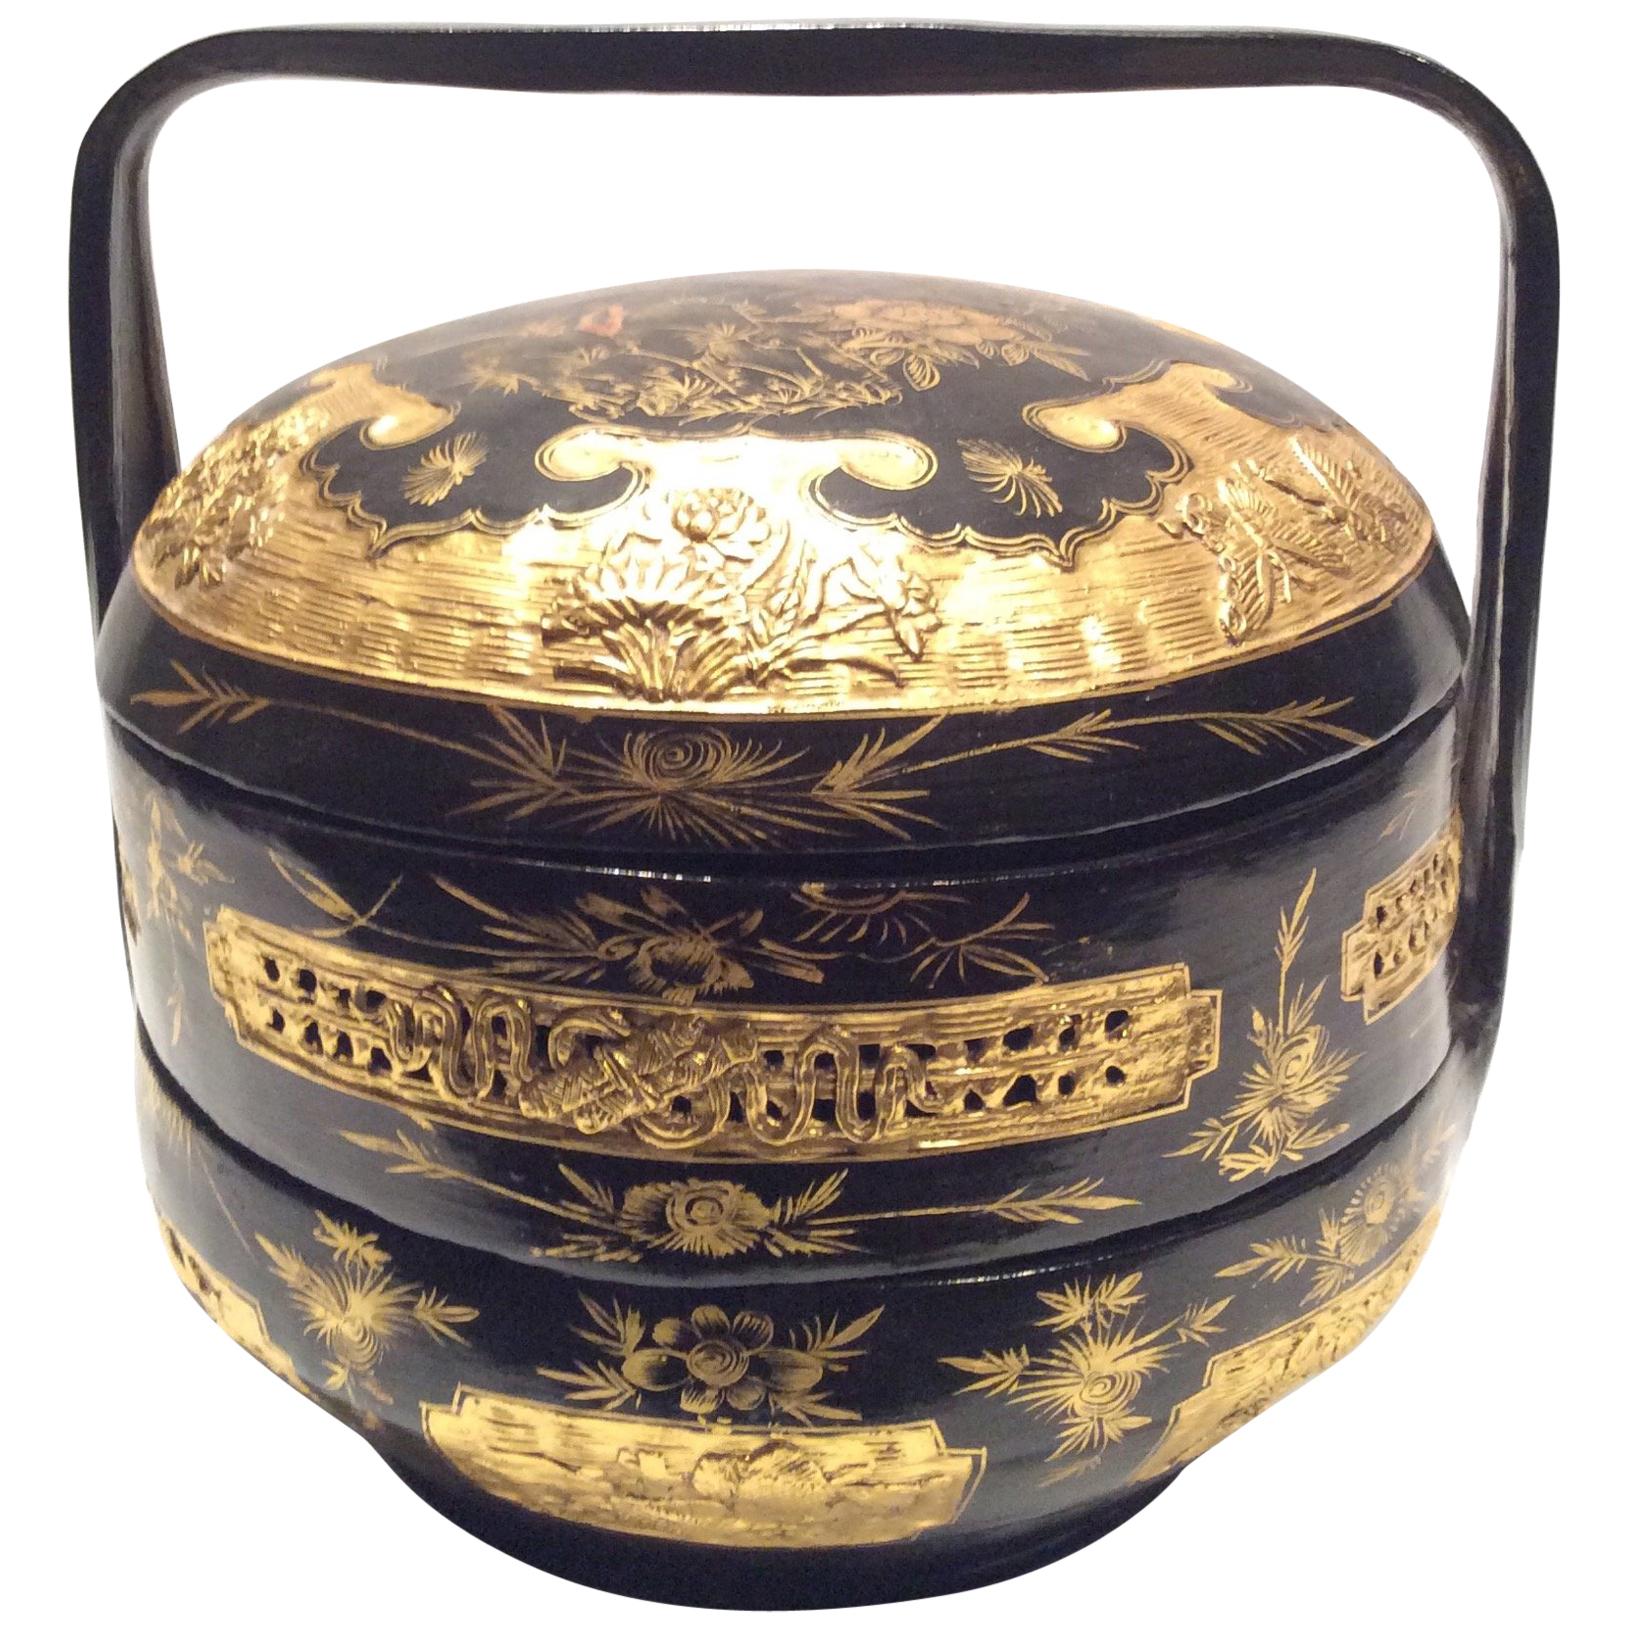 Chinese Black Lacquer Stacking Lunch Box